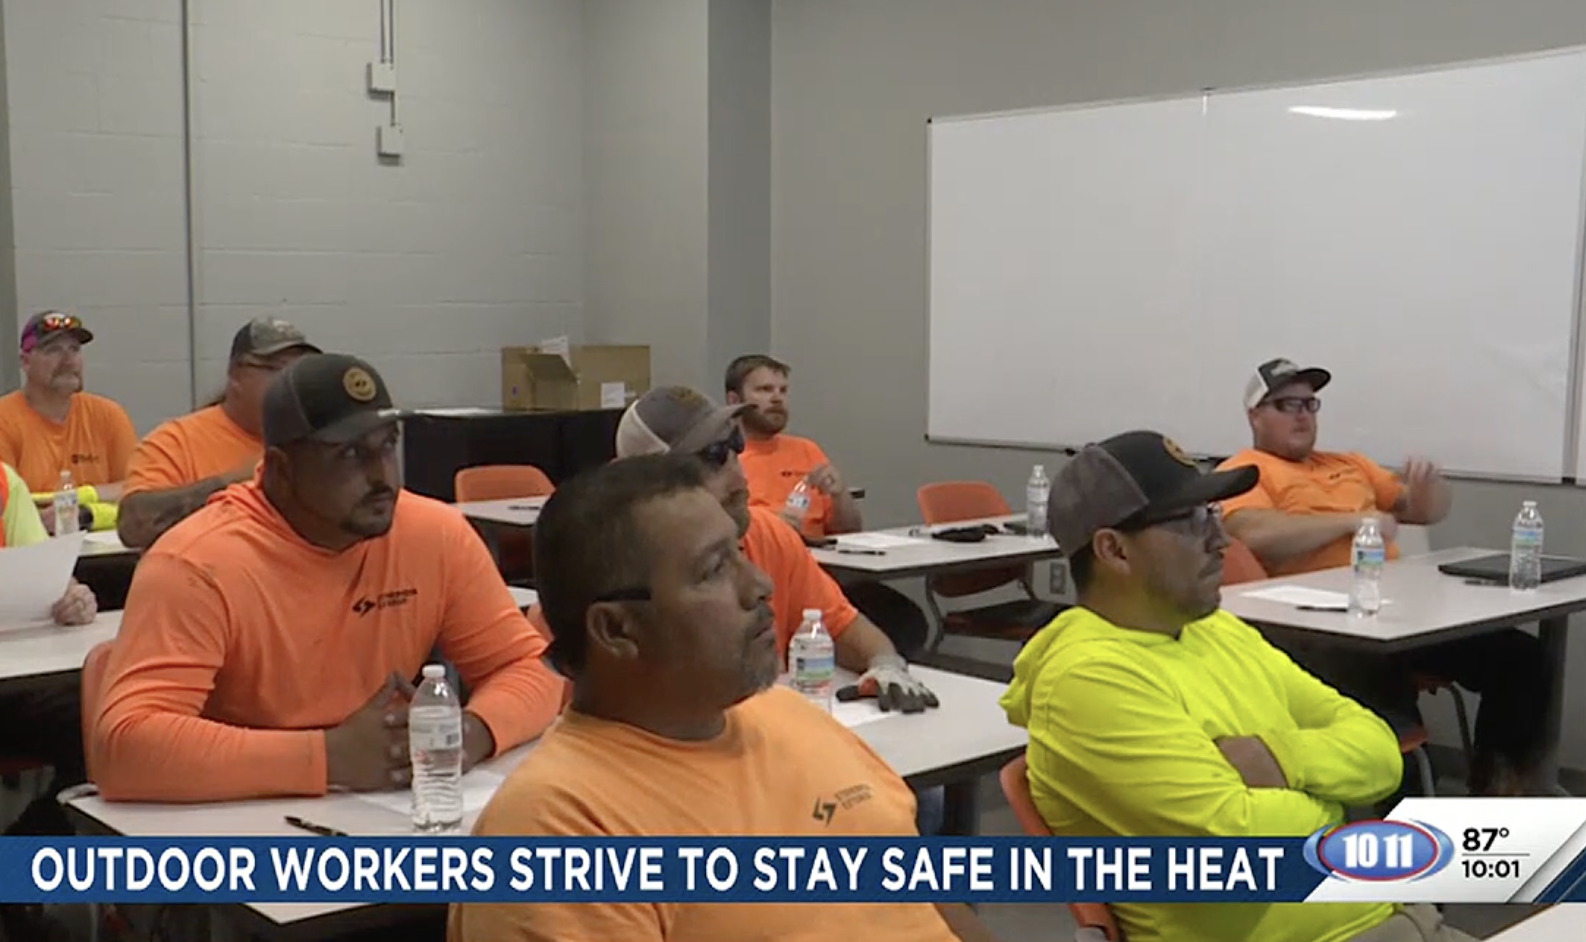 Stonebrook Workers Staying Safe in the Heat